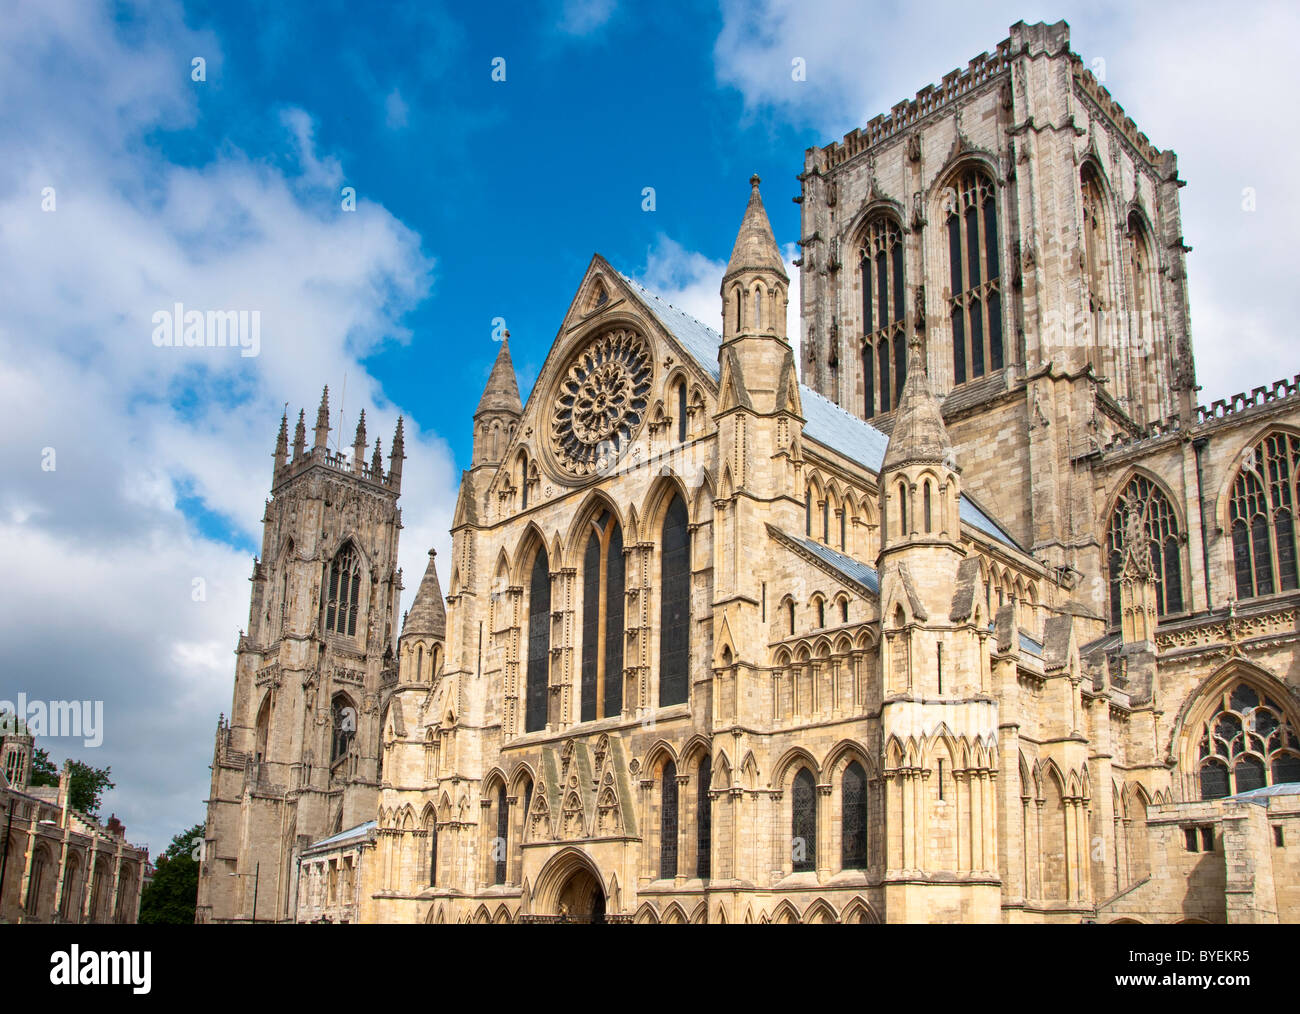 York Minster Cathedral, England Stockfoto